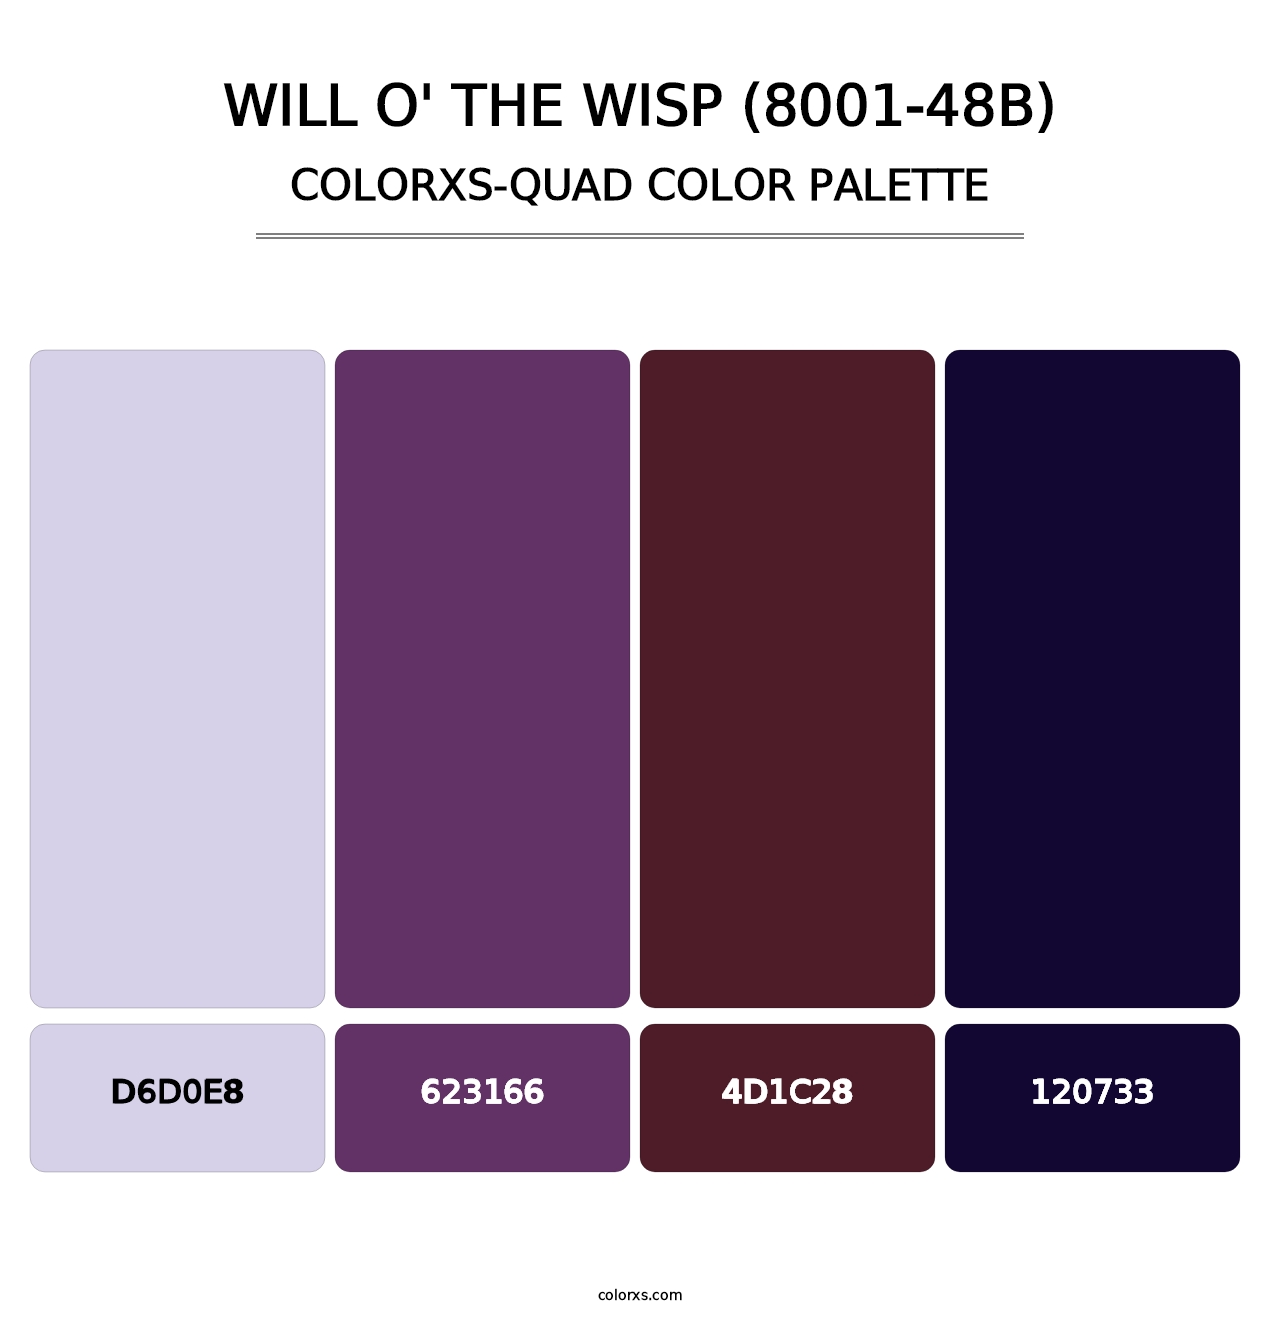 Will o' the Wisp (8001-48B) - Colorxs Quad Palette